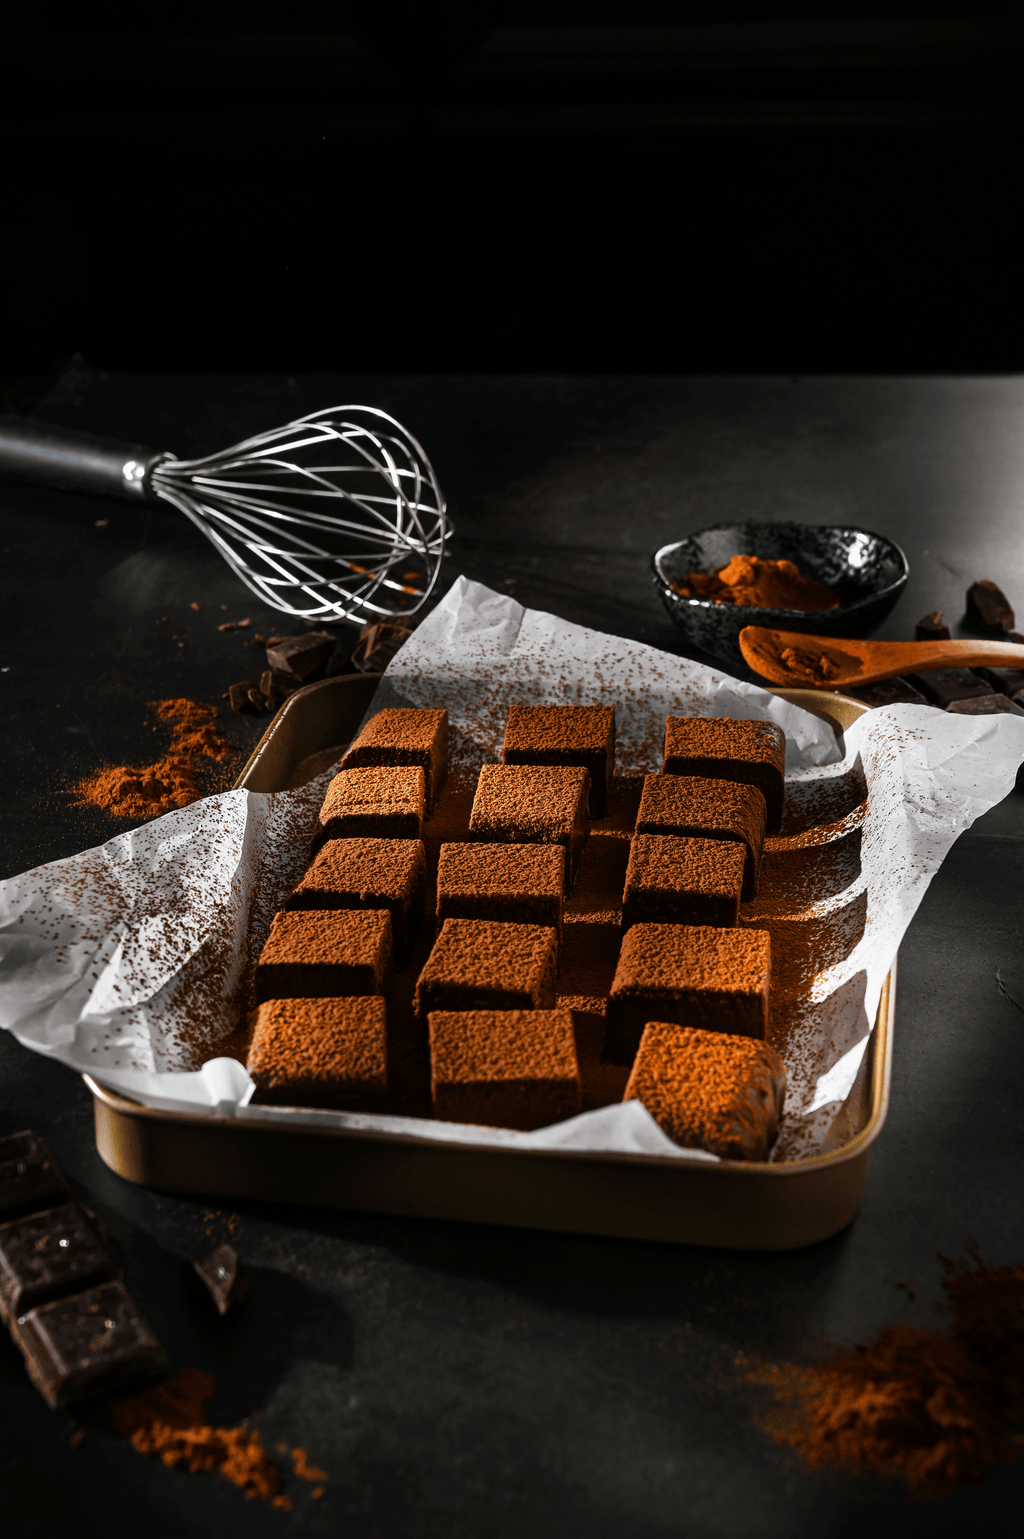 Experience the medley of flavours in our Nutella Dark NAMA Chocolate – bitter, sweet, and roasty.